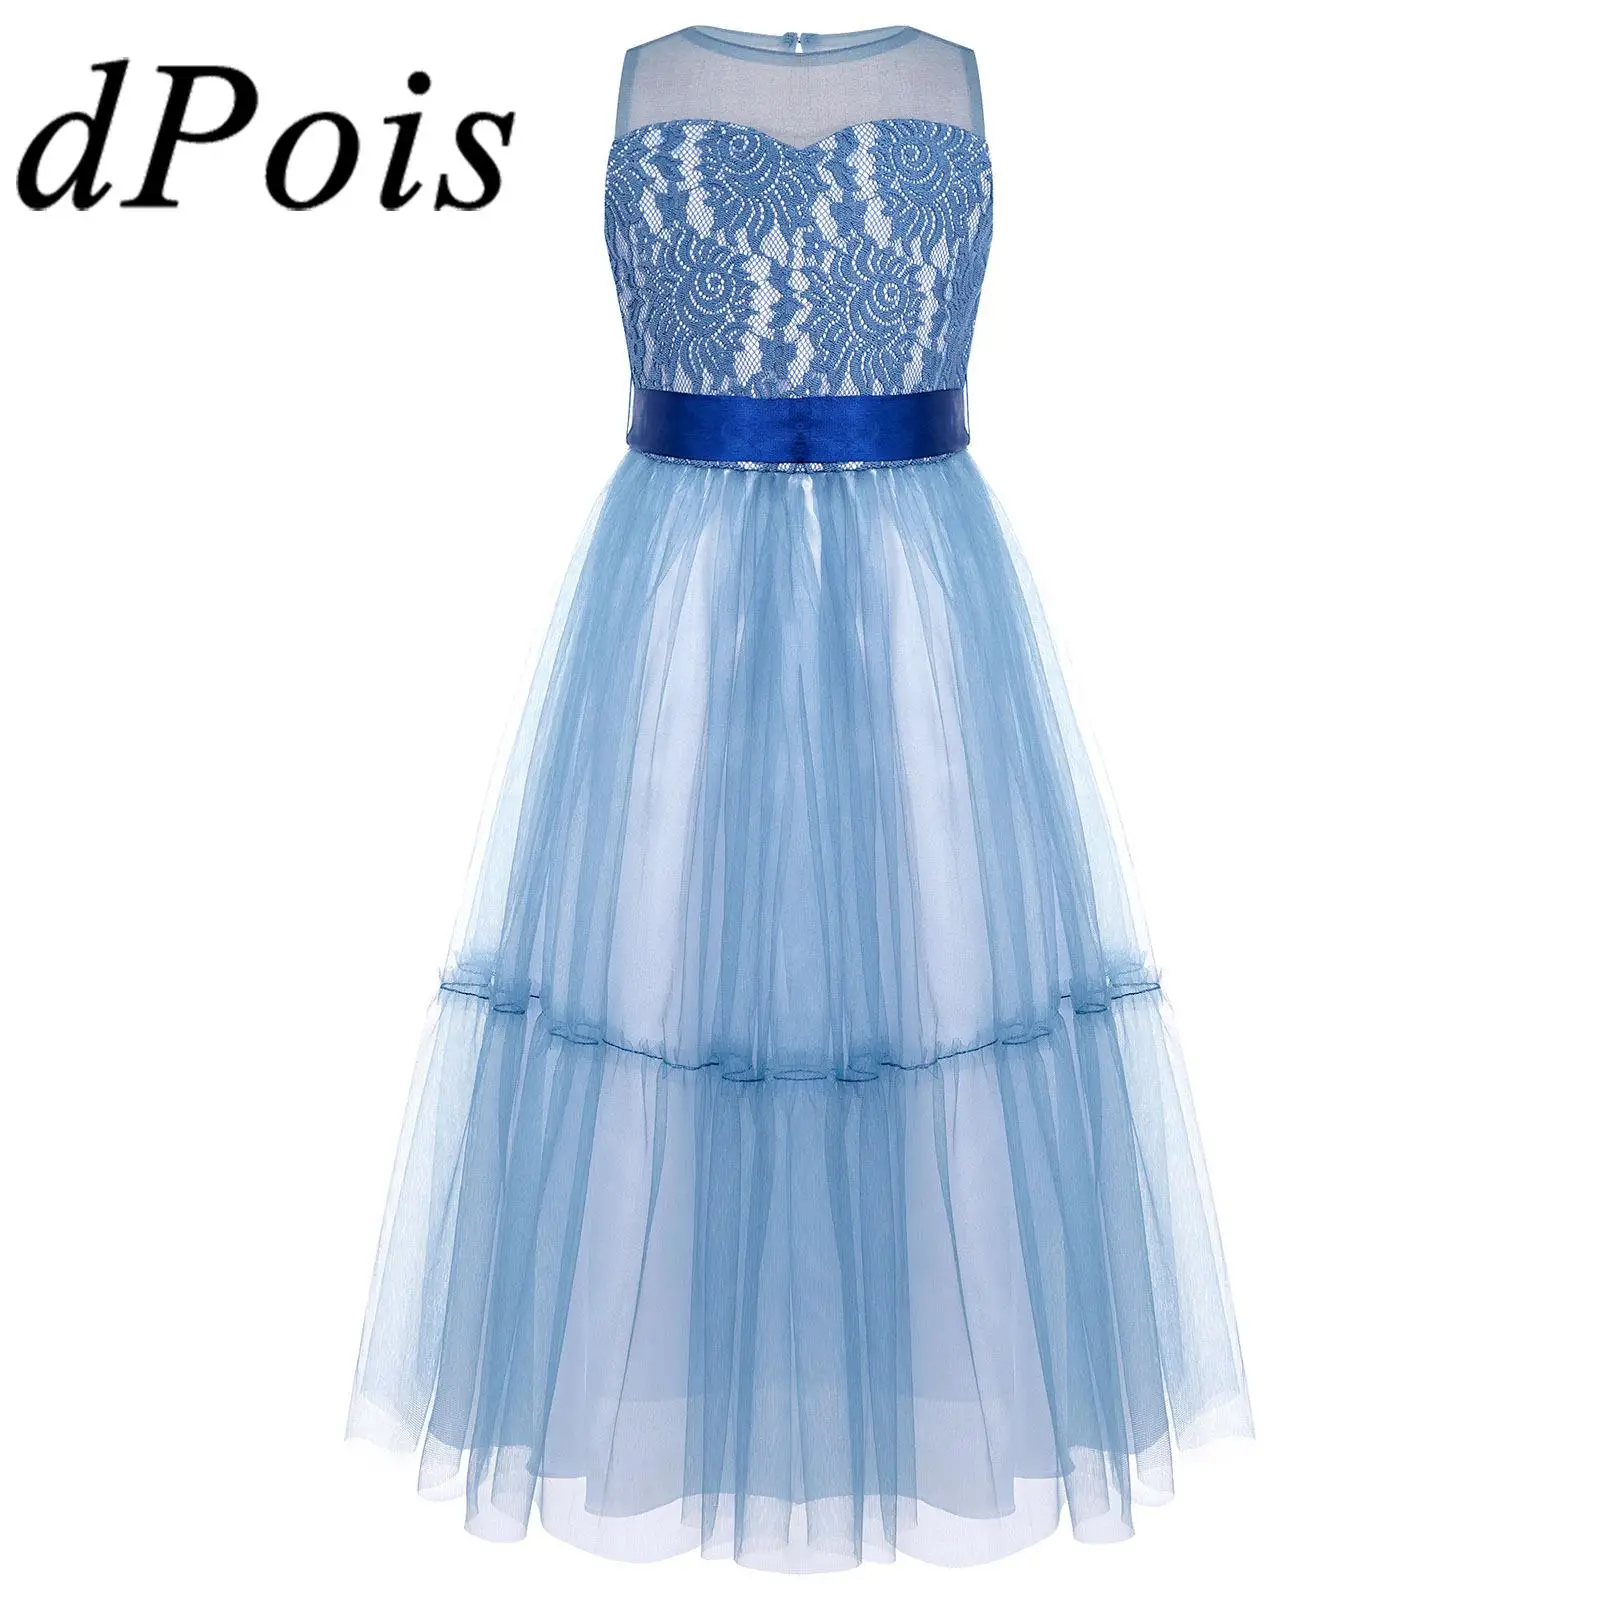 

Children's Cospaly Princess Costume Elegant Lace Tulle Kids Dresses for Girl Wedding Birthday Party Dress Petite Robe Filles